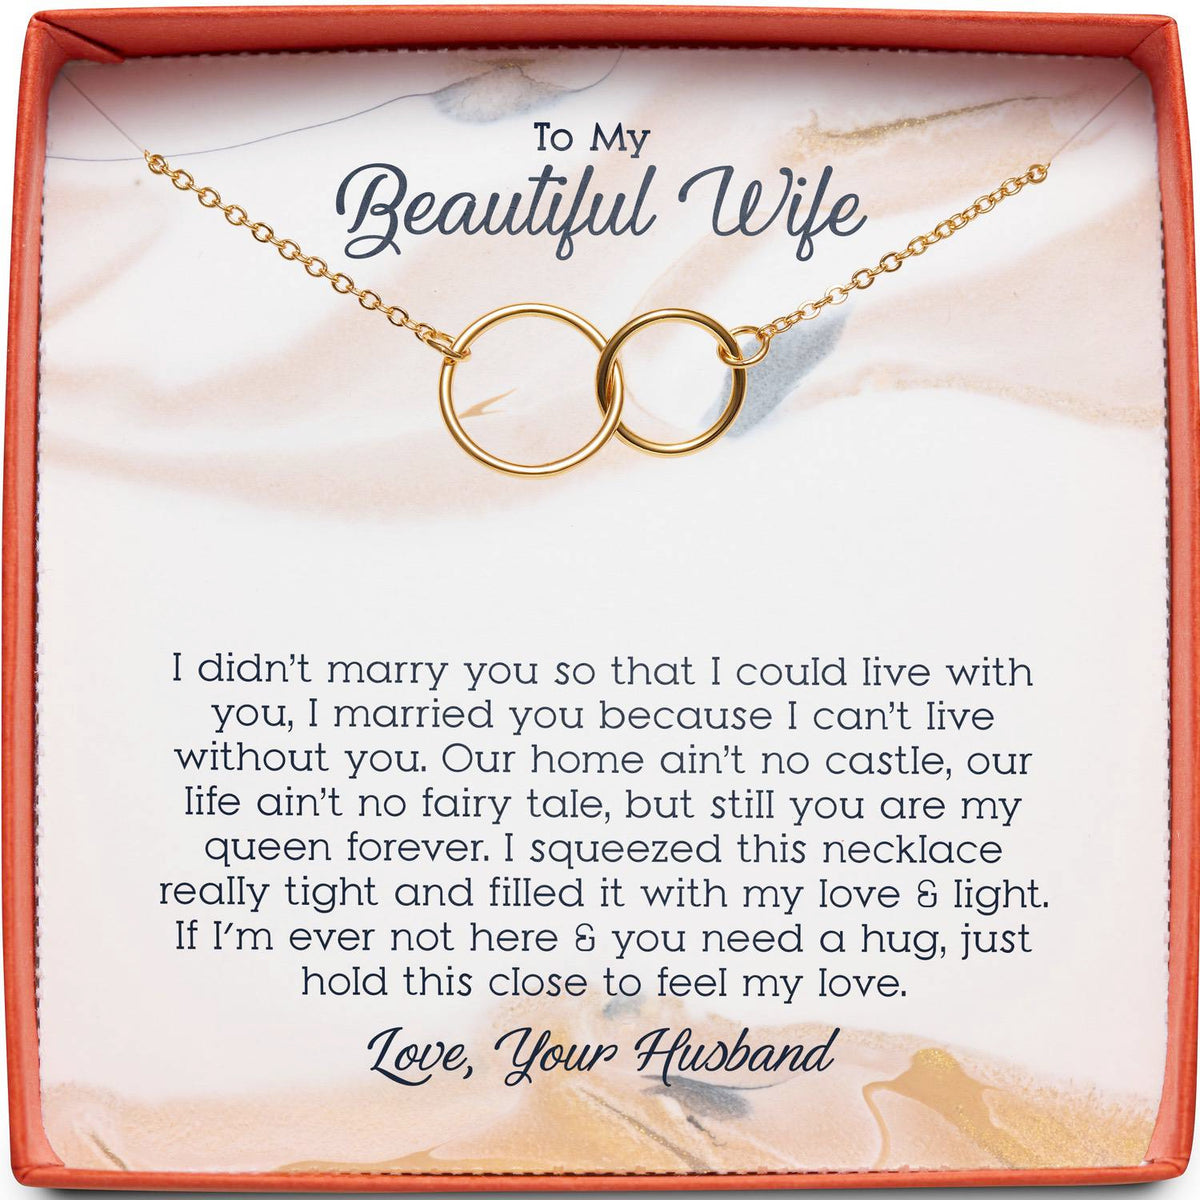 To My Beautiful Wife | I Squeezed This Necklace | Interlocking Circles